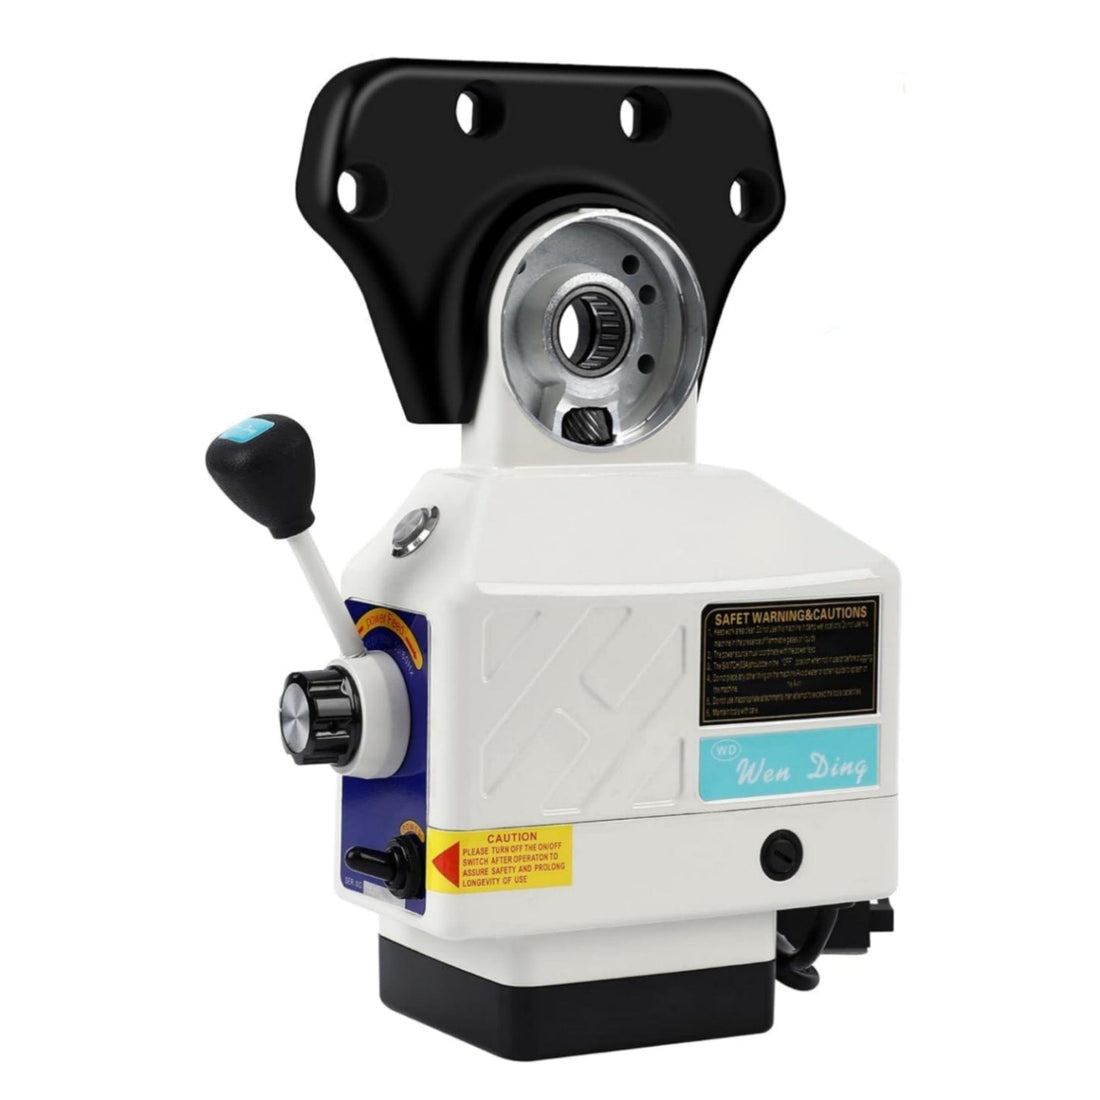 Z-Axis Power Feed for Power Milling Machines Adjustable Speed Table Milling Machine